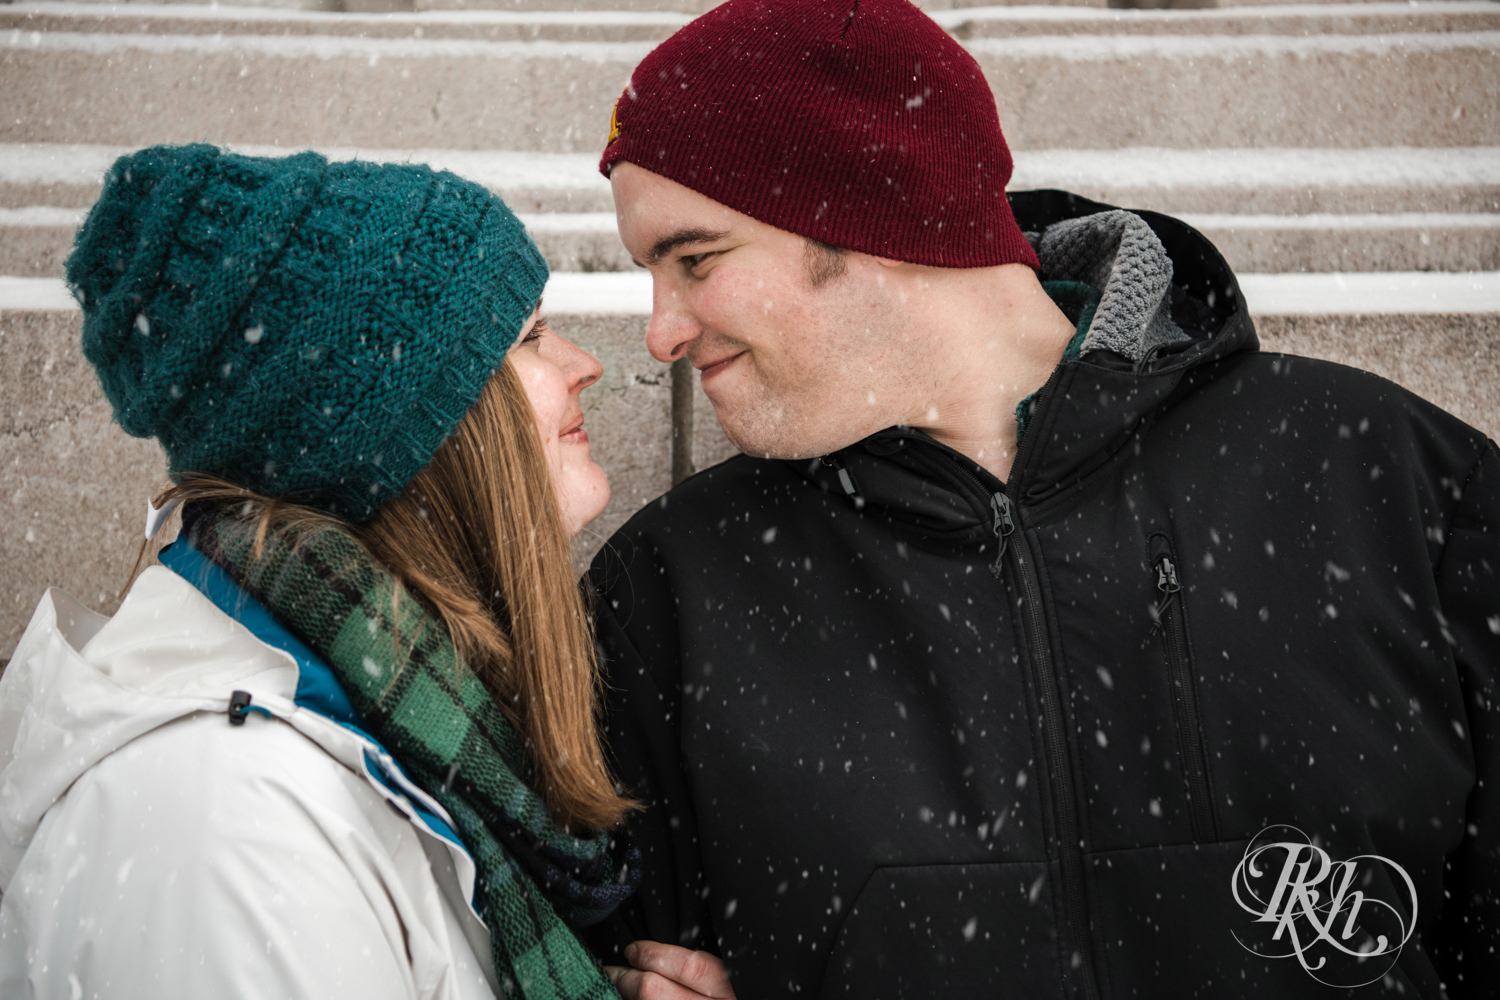 Man and woman smile in the falling snow during engagement photography in Saint Paul, Minnesota.